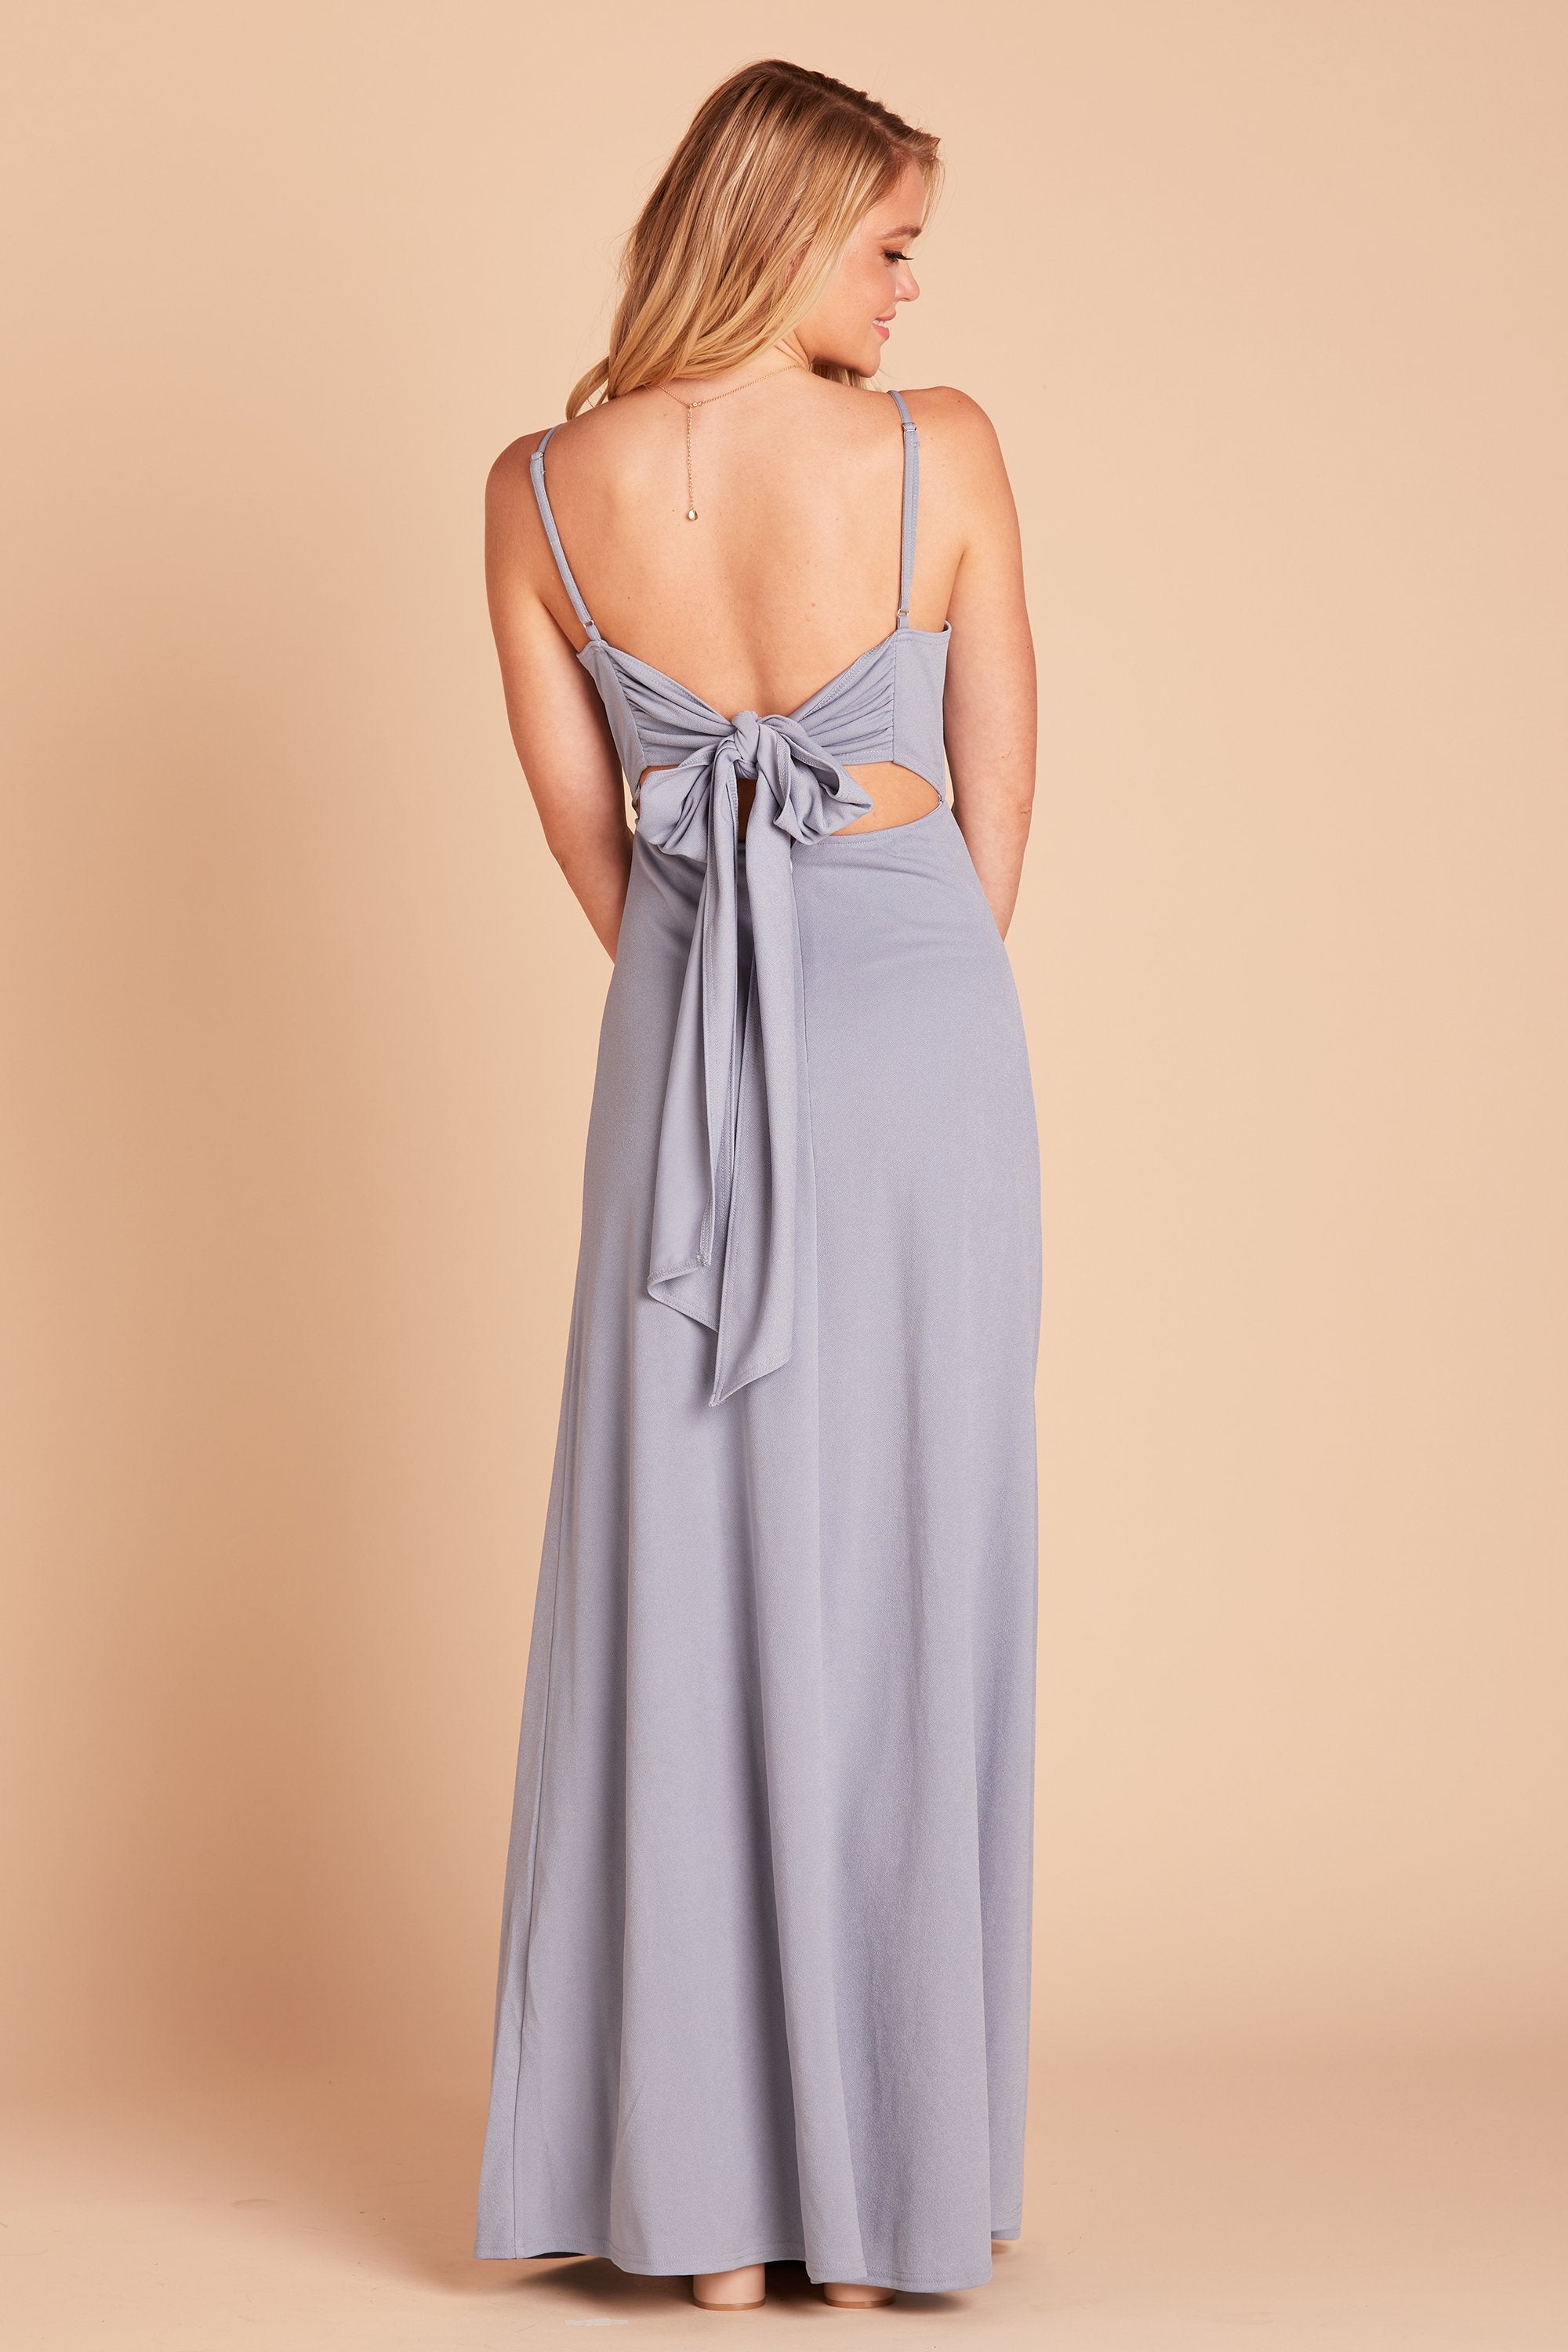 Benny bridesmaid dress in dusty blue crepe by Birdy Grey, back view